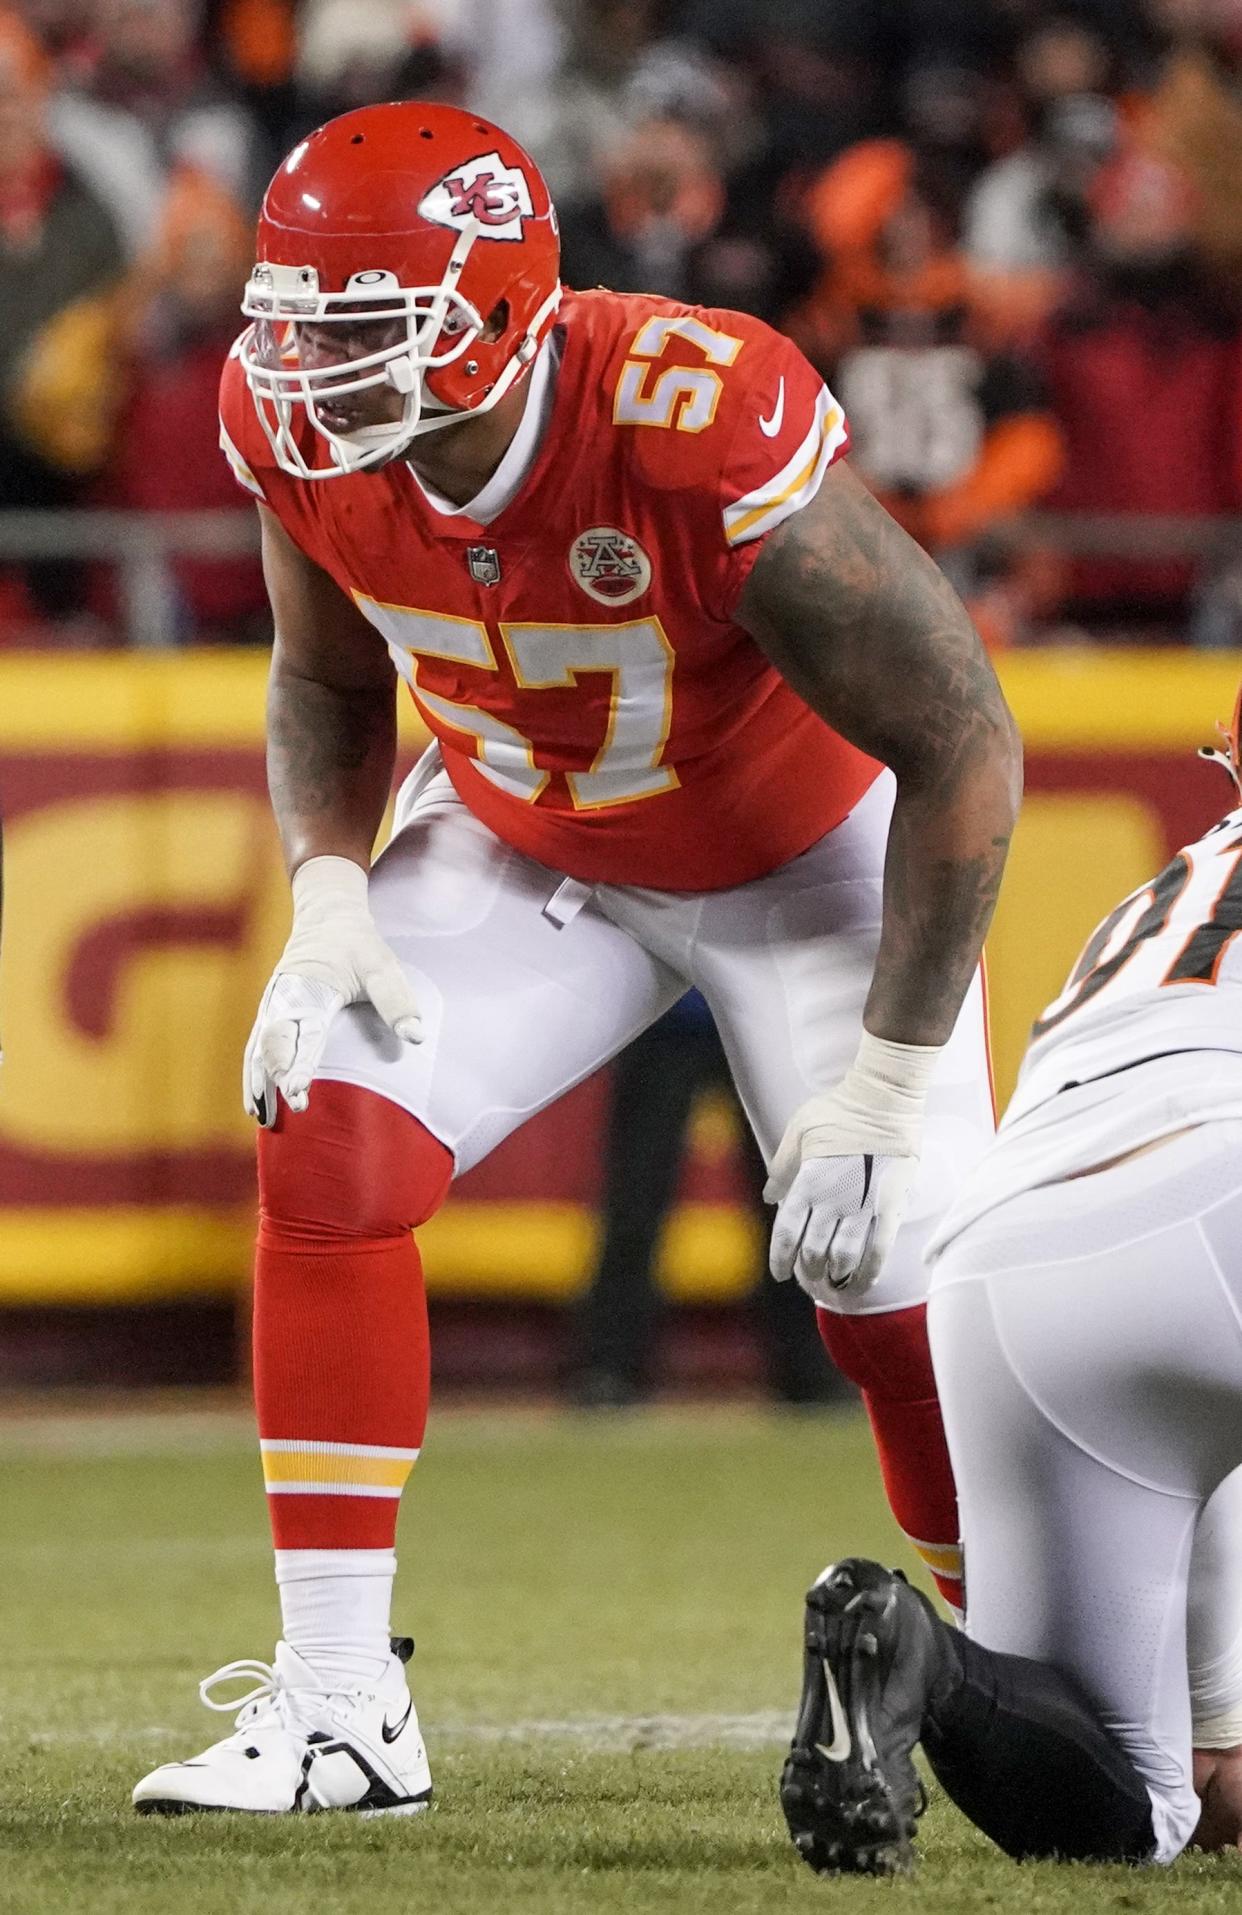 Jan 29, 2023; Kansas City, Missouri, USA; Kansas City Chiefs offensive tackle Orlando Brown Jr. (57) at the line of scrimmage against the Cincinnati Bengals during the AFC Championship game at GEHA Field at Arrowhead Stadium.